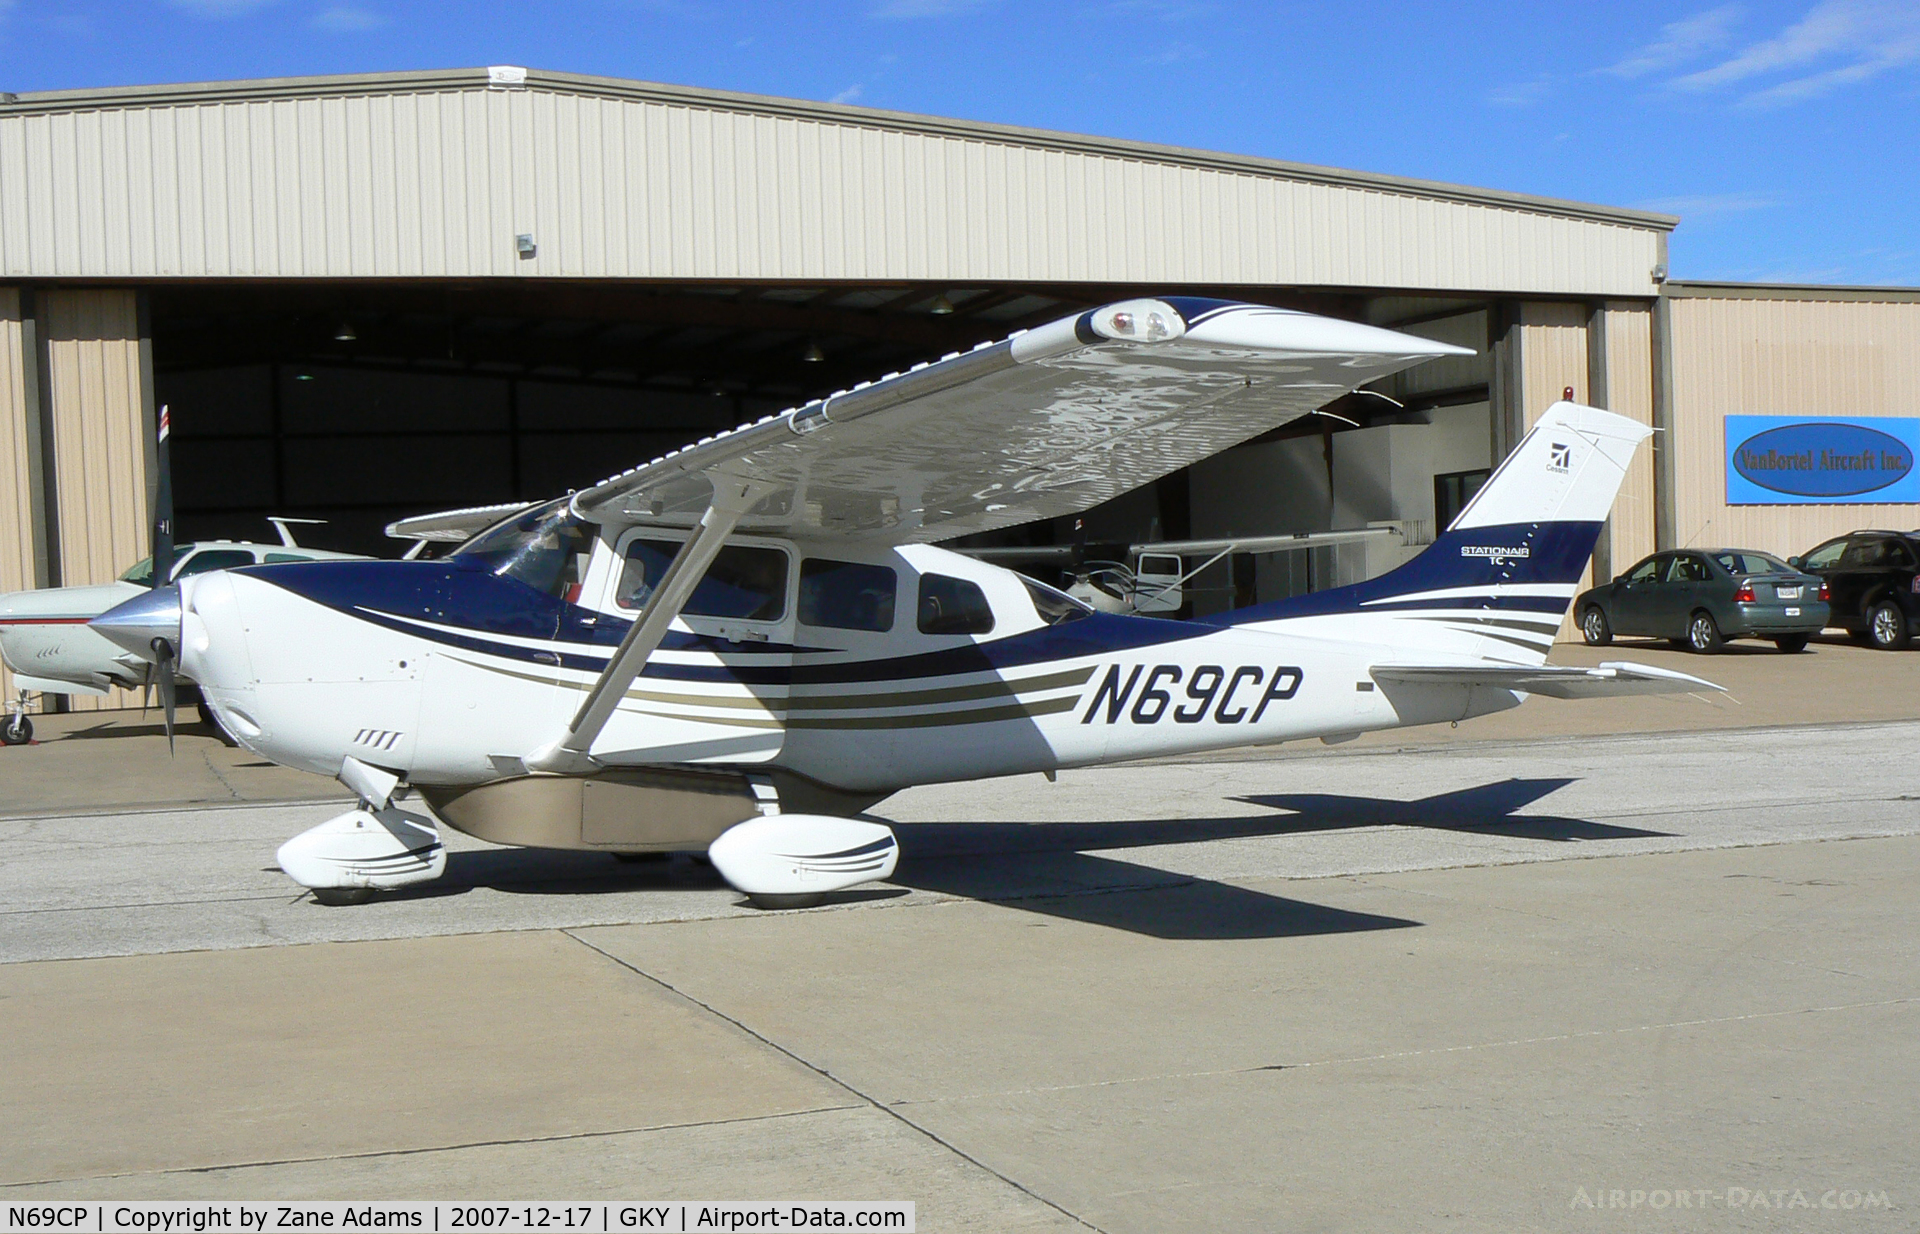 N69CP, 2005 Cessna T206H Turbo Stationair C/N T20608564, At Arlington - notice cargo pod. Pilot tells me it will hold up to 300 lbs - Great for bulky items you don't want in the cabin.